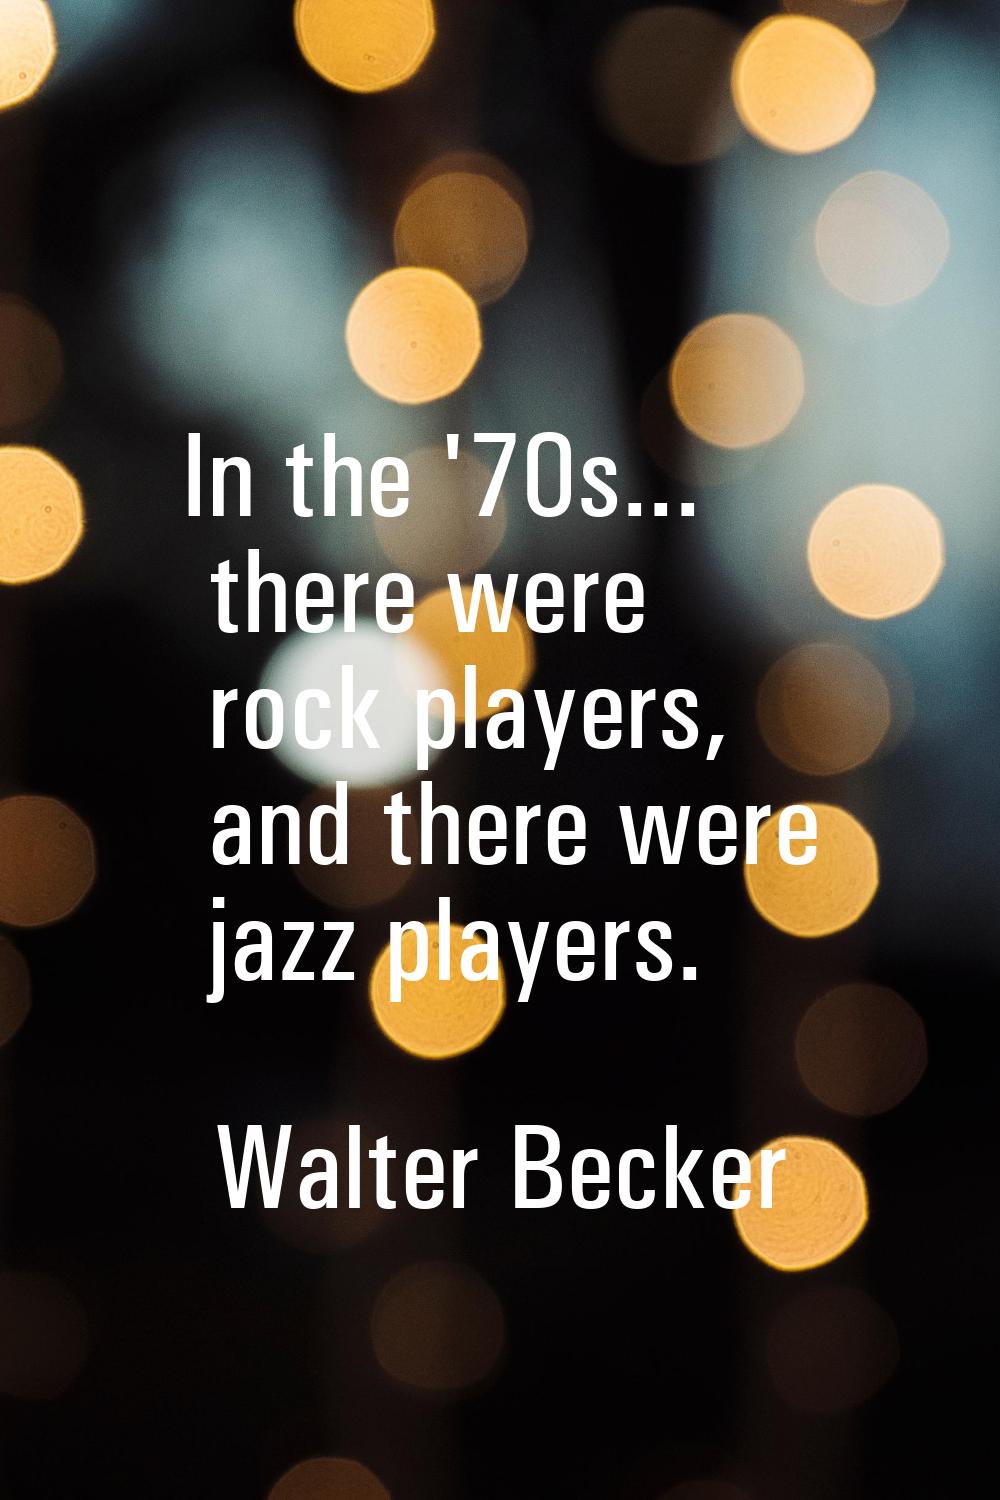 In the '70s... there were rock players, and there were jazz players.